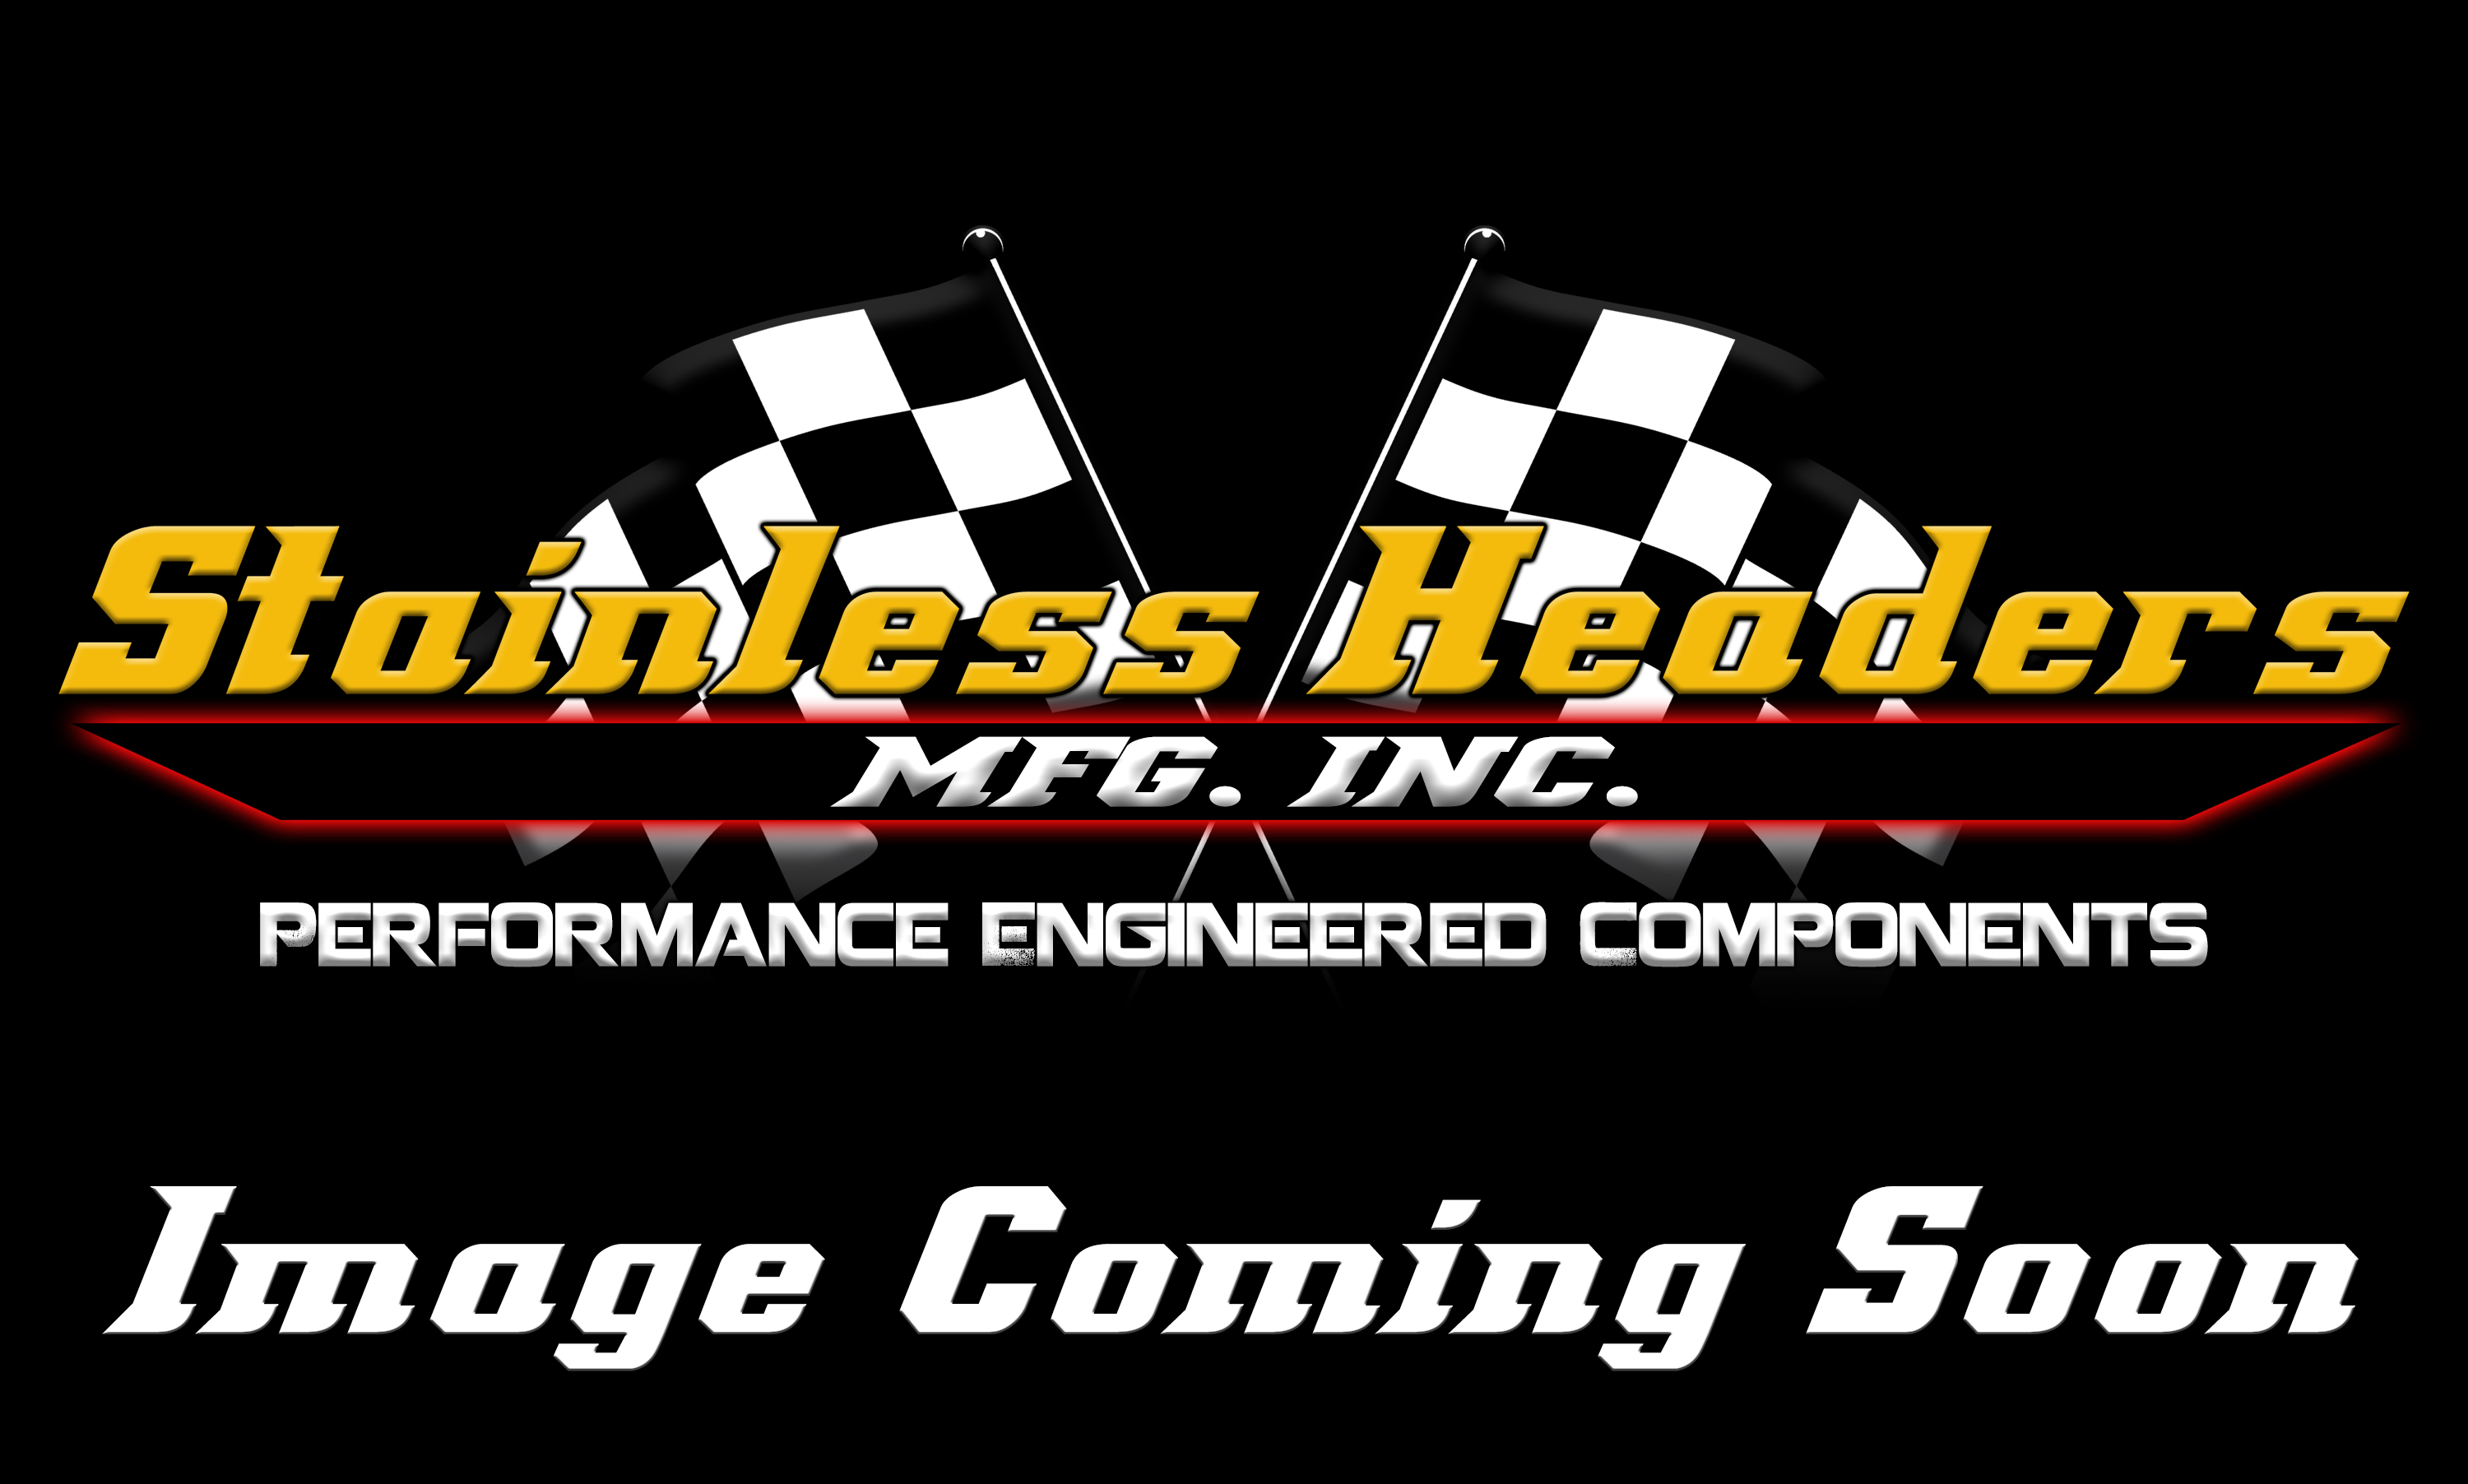 Merge Collectors - 321 Stainless Steel Merge Collectors - Stainless Headers - 2 1/8" Primary 8 into 1 Performance Merge Collector-16ga 321ss